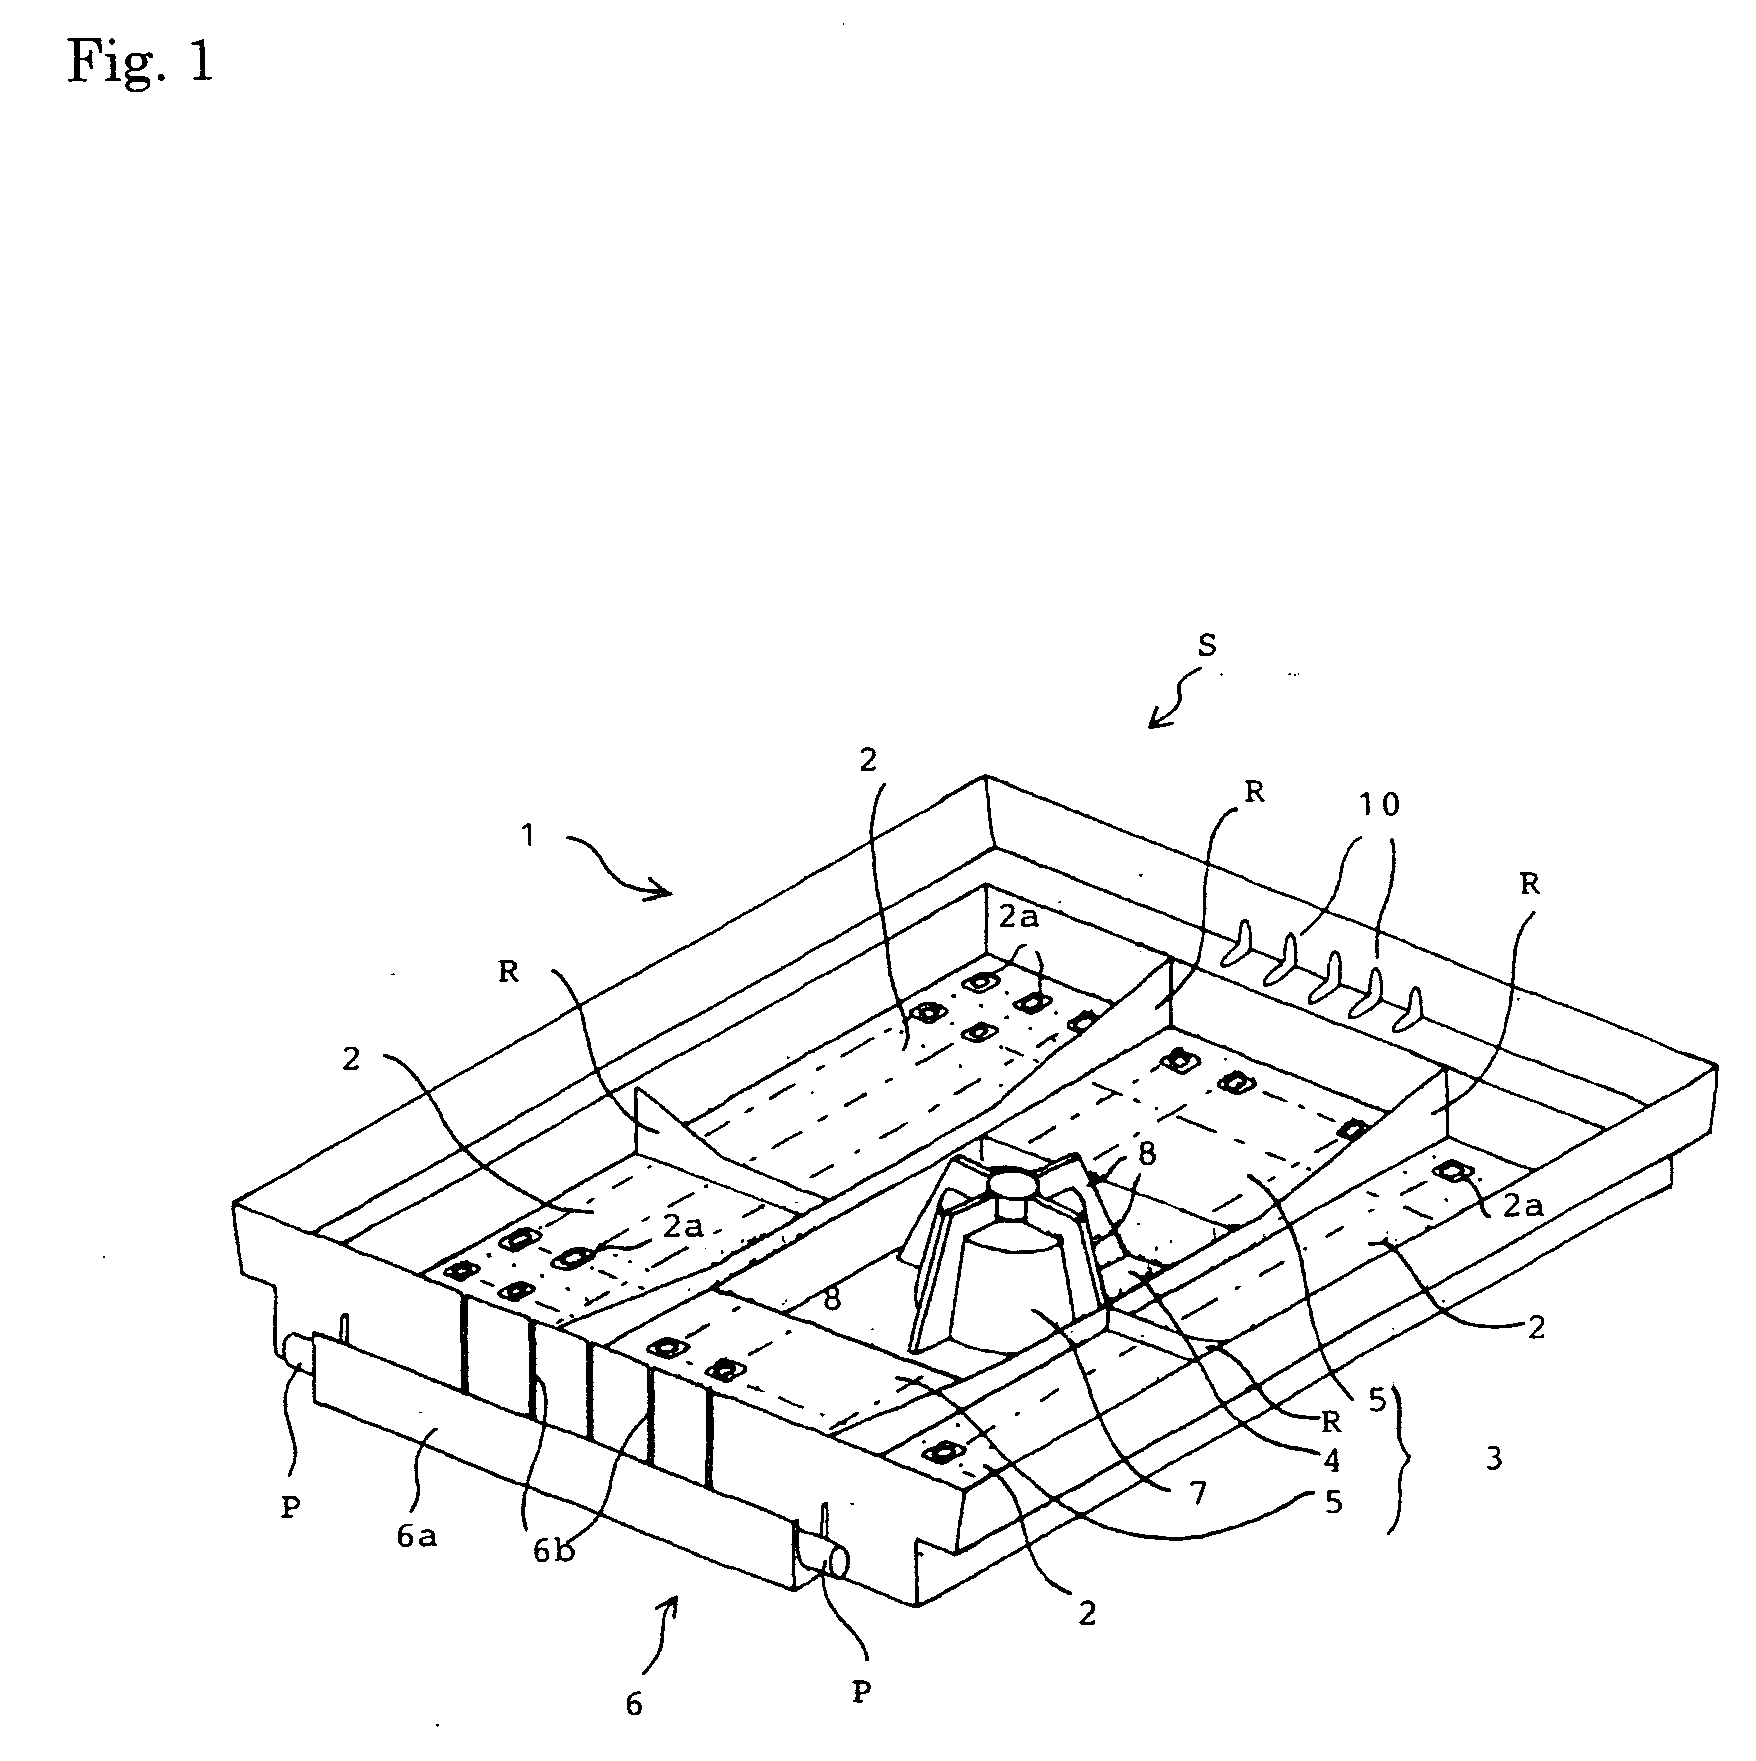 Planting device and planting structure for plants